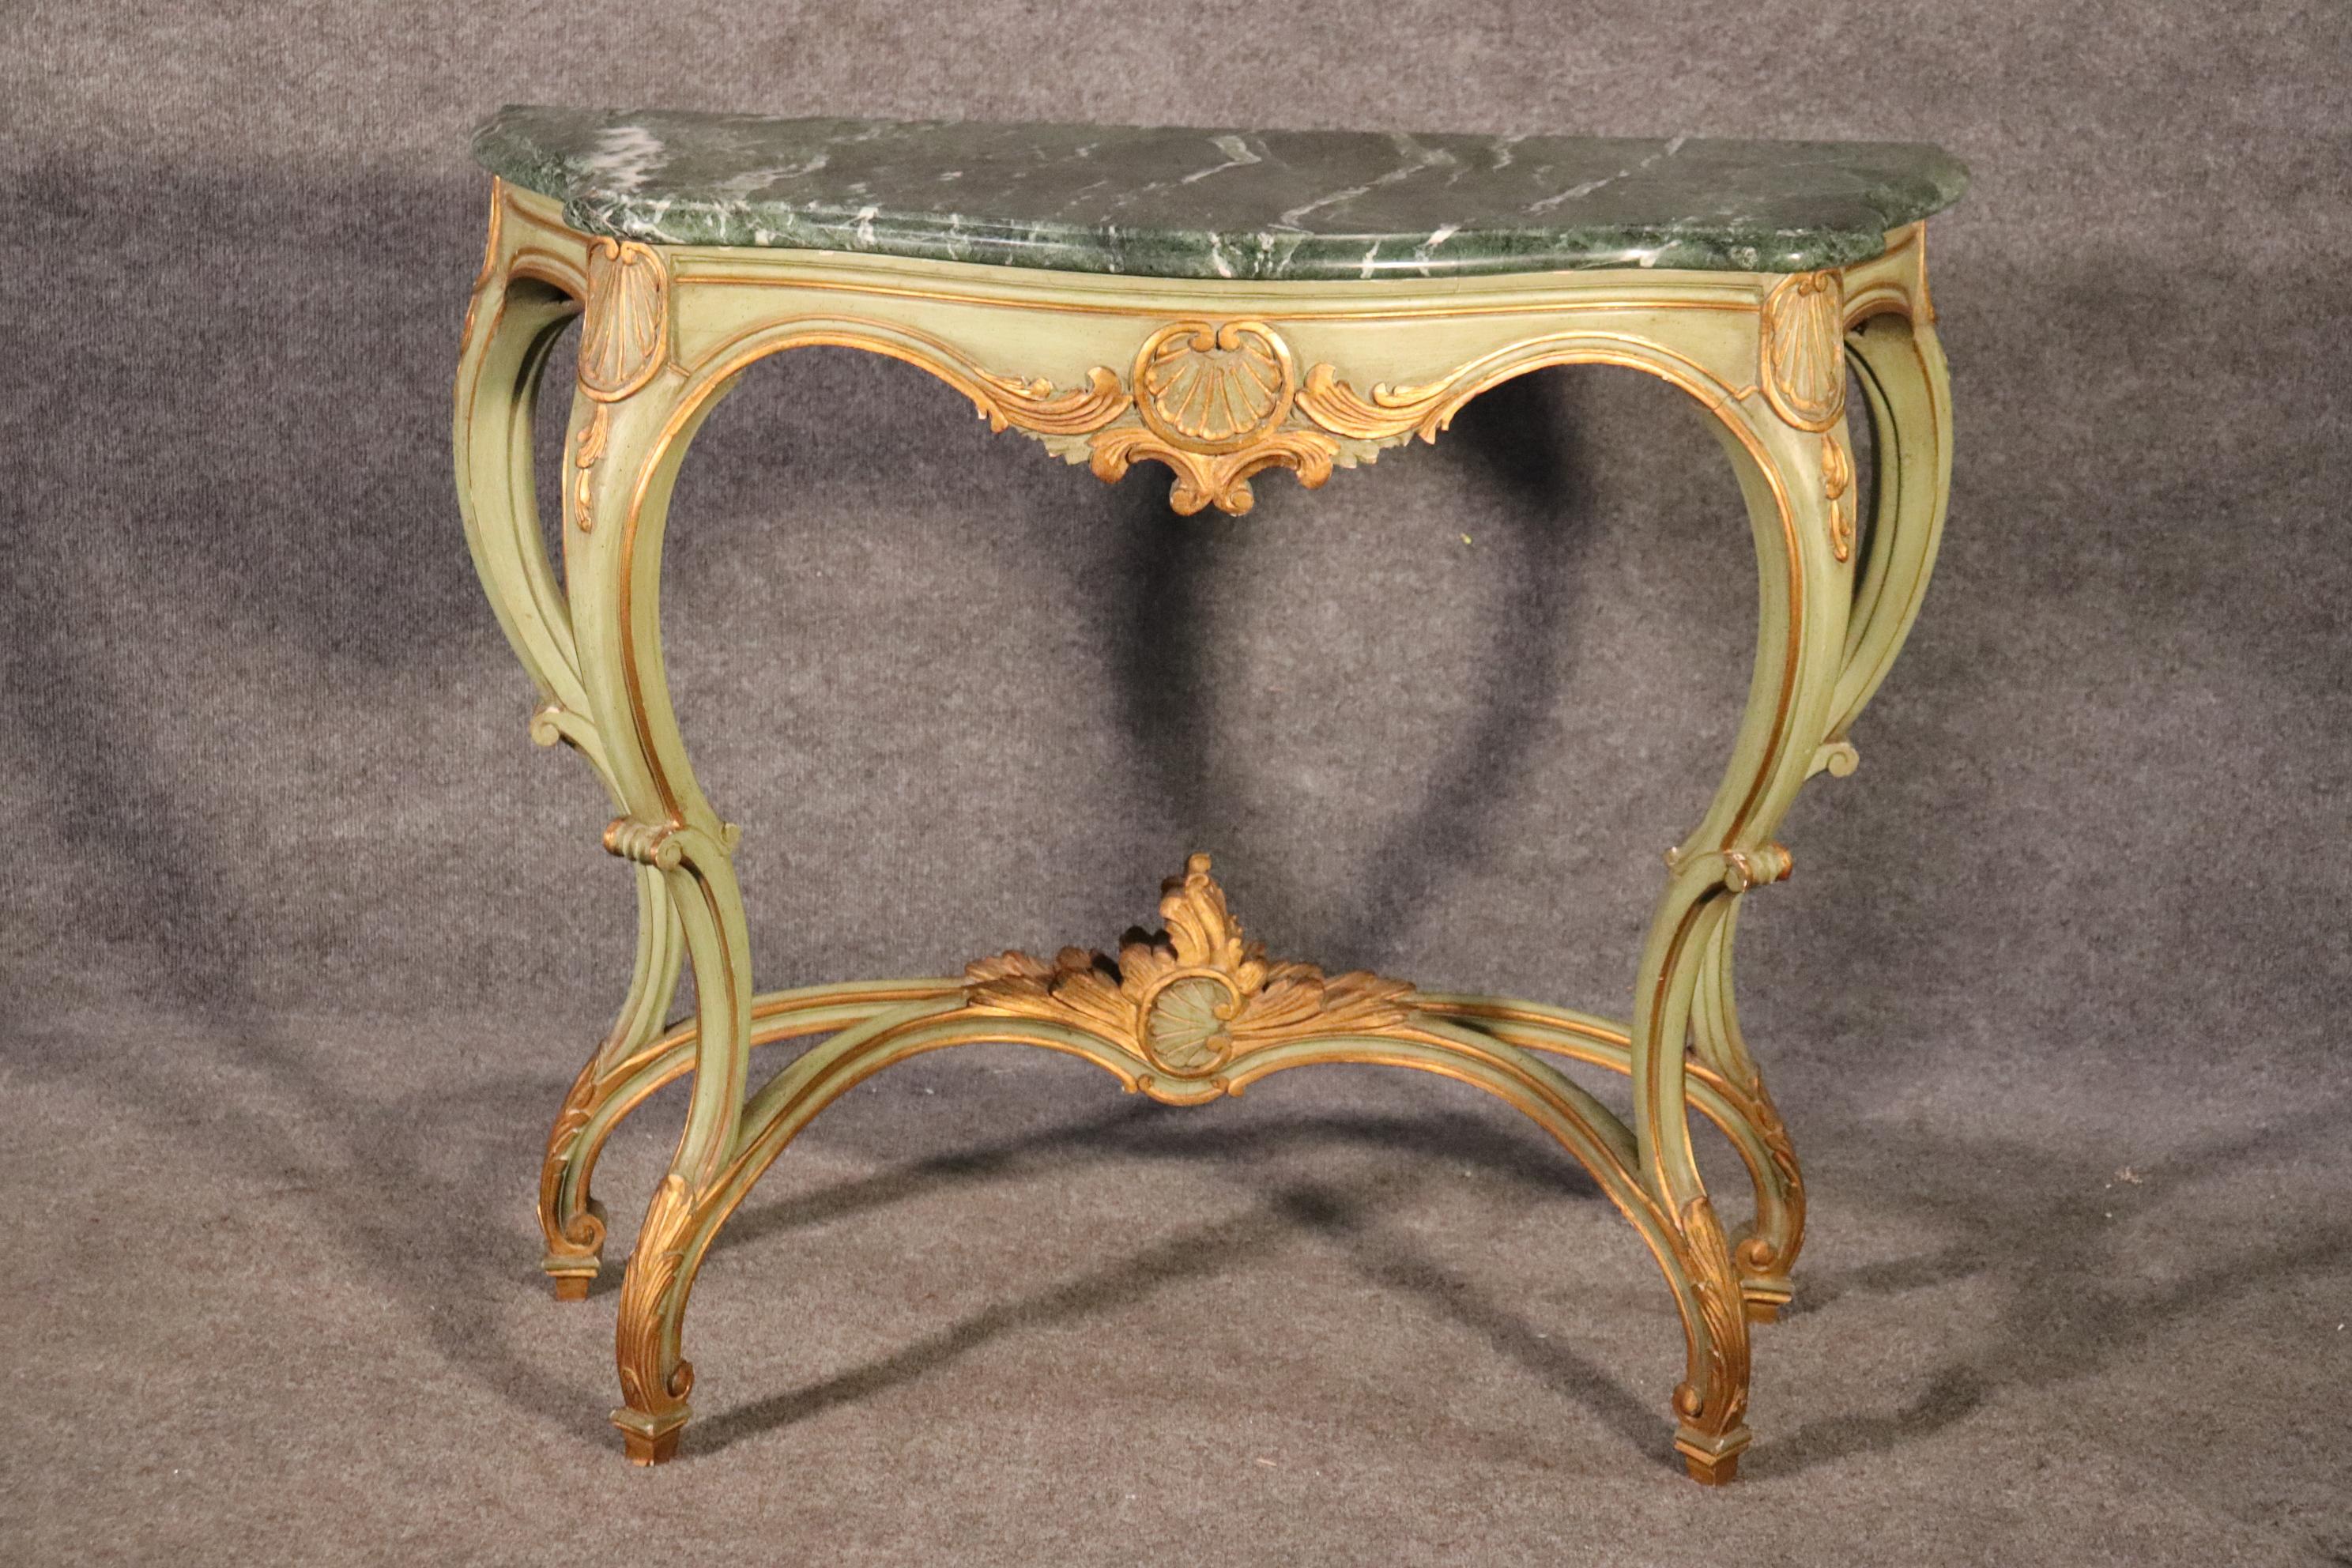 This is a gorgeous French Louis XV console table with a great painted finish and an equally beautiful Verdi marble top. The table measures 41 wide x 17 deep x 35 tall. The table is in good vintage condition.